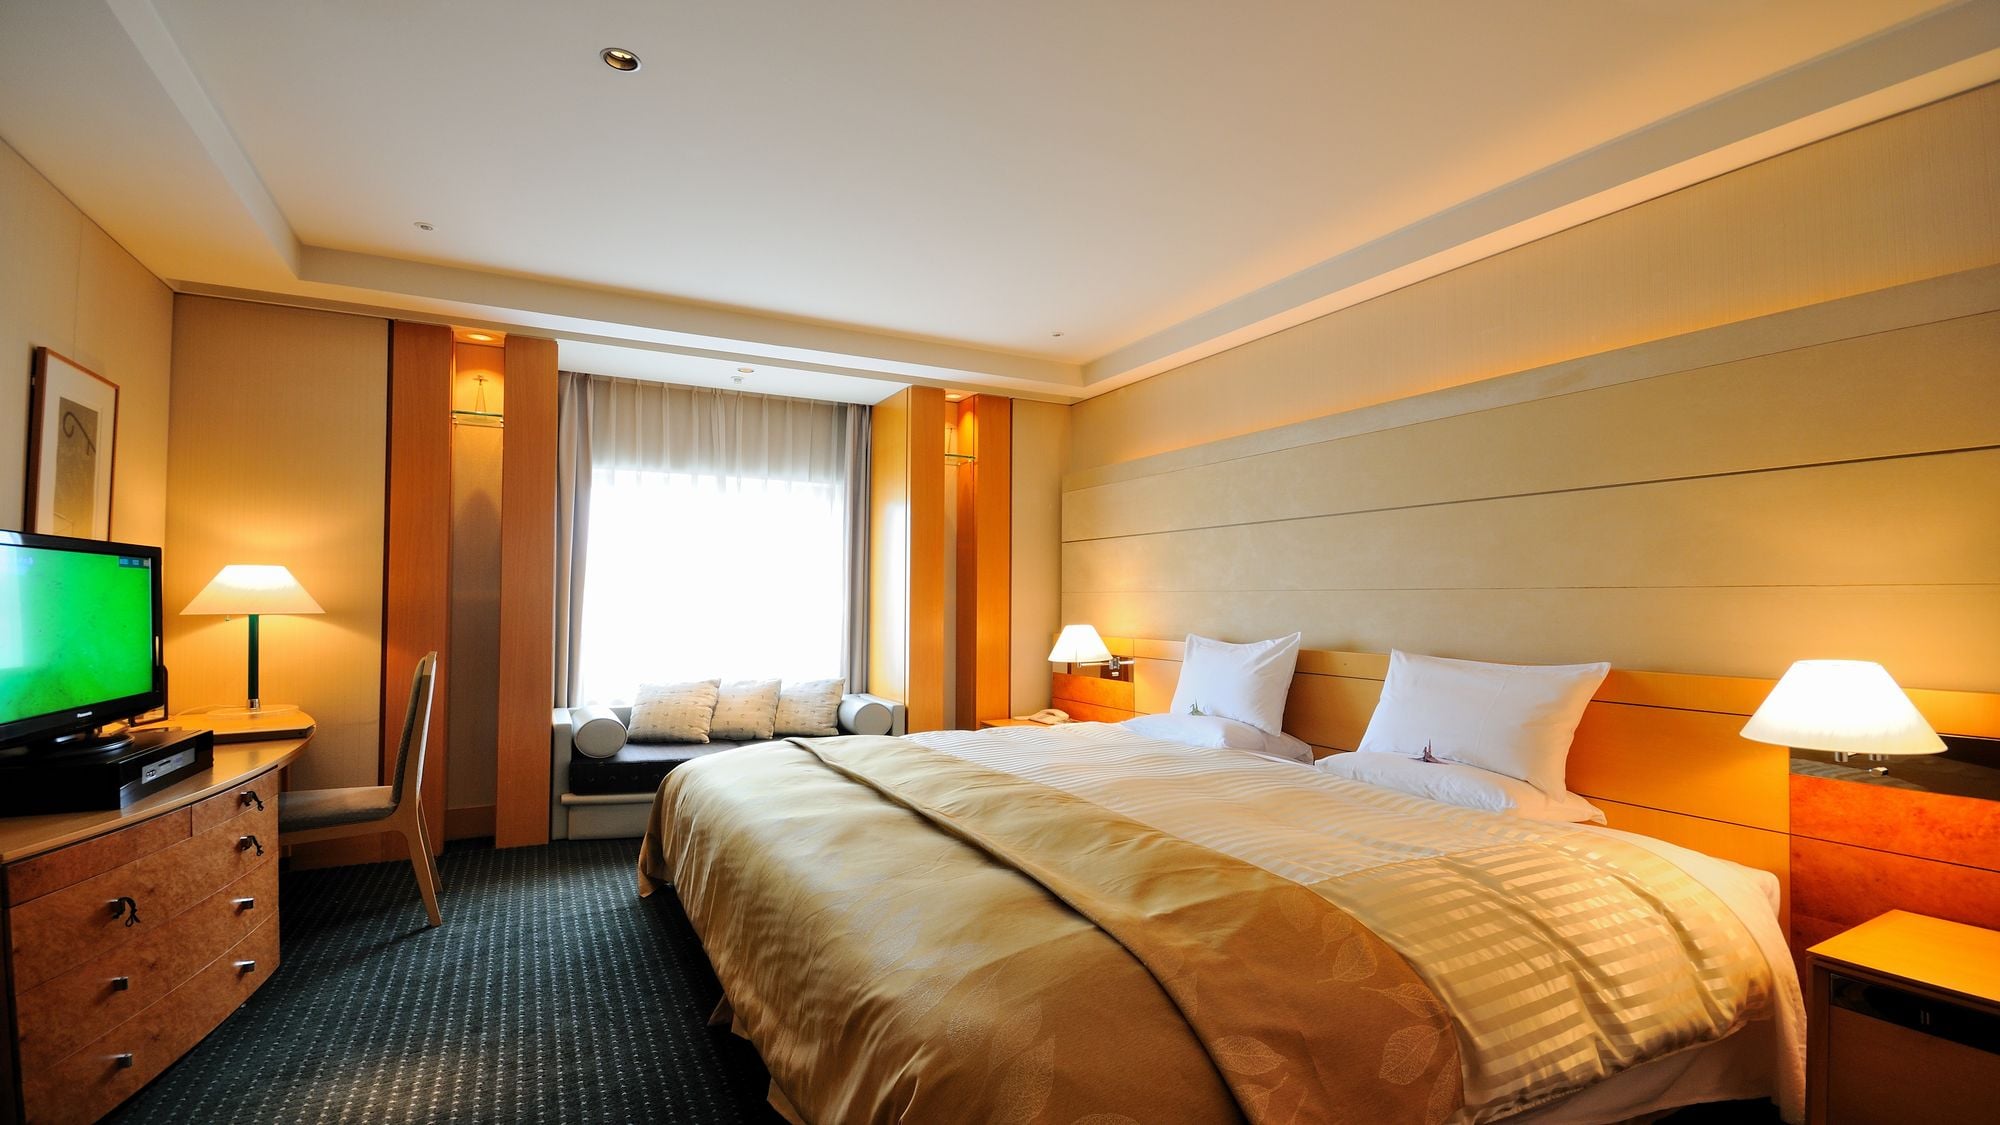 Suite room □ 83 sqm □ Bed width 240 cm King bed There are two rooms, a bedroom and a living room.